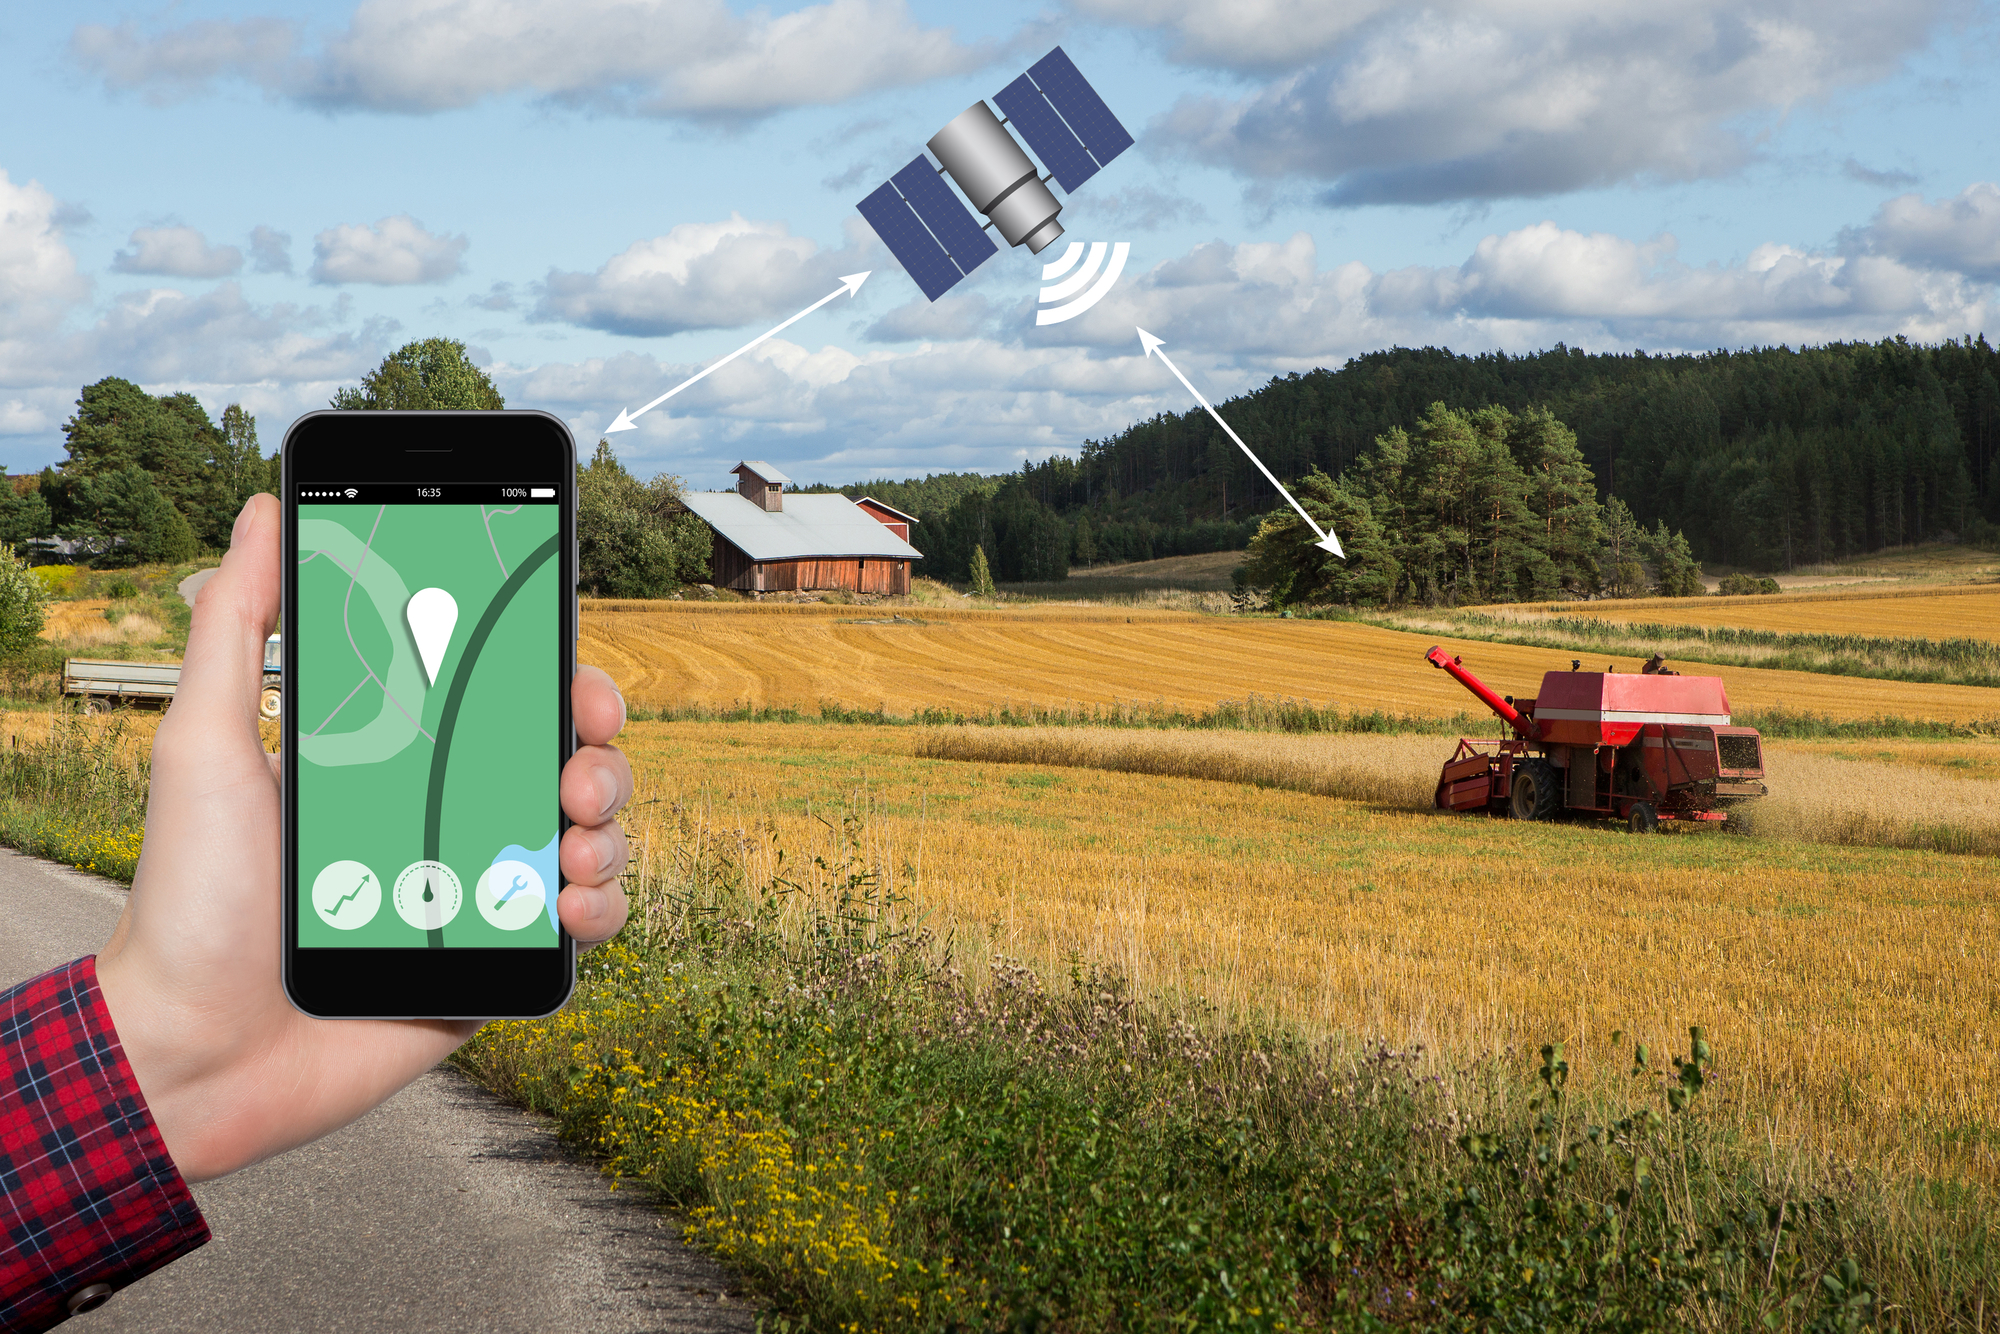 Agrvision will utilize the EOSDA Crop Monitoring platform to provide consultancy to the regional governments, farming cooperatives, input suppliers, food producers, and other agribusinesses